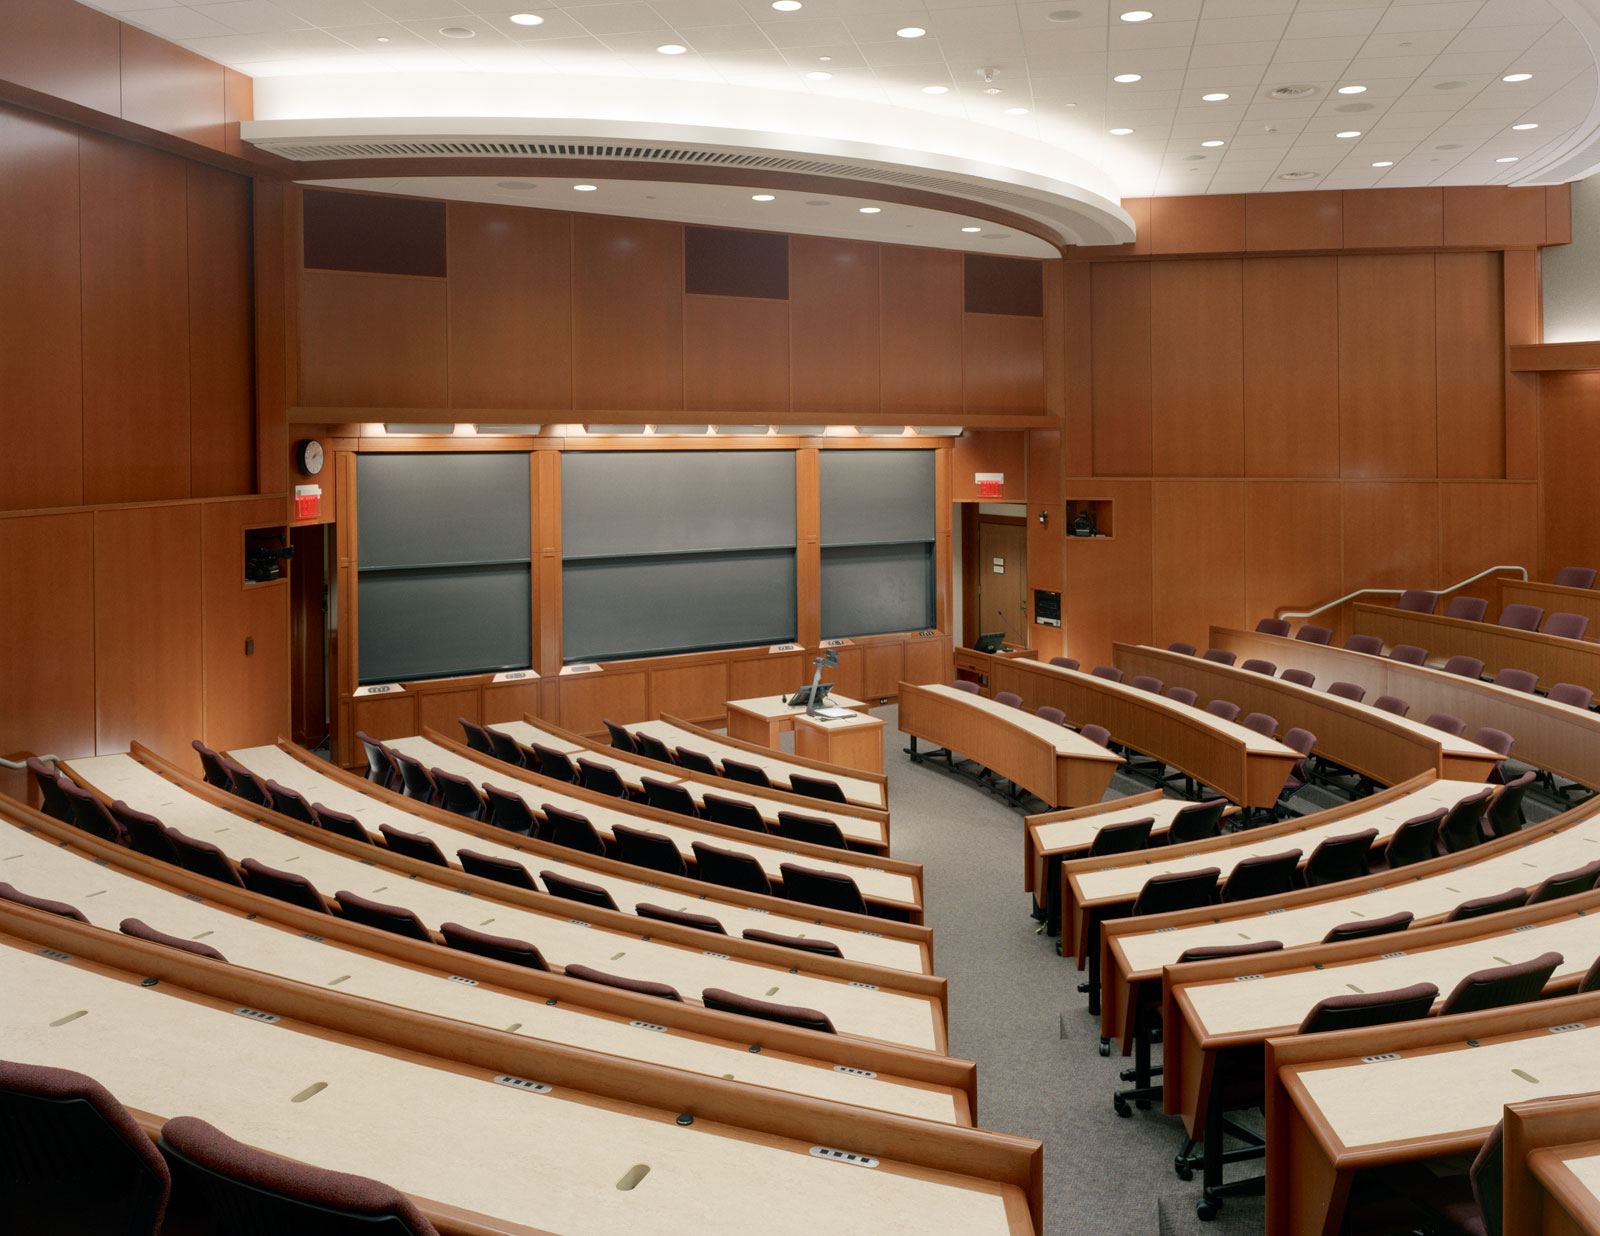 MRW fabricated the wall panels that enhance this space. MRW worked closely with Harvard, Shawmut and Baker Design Group to create a state-of-the-art lecture hall for Harvard.